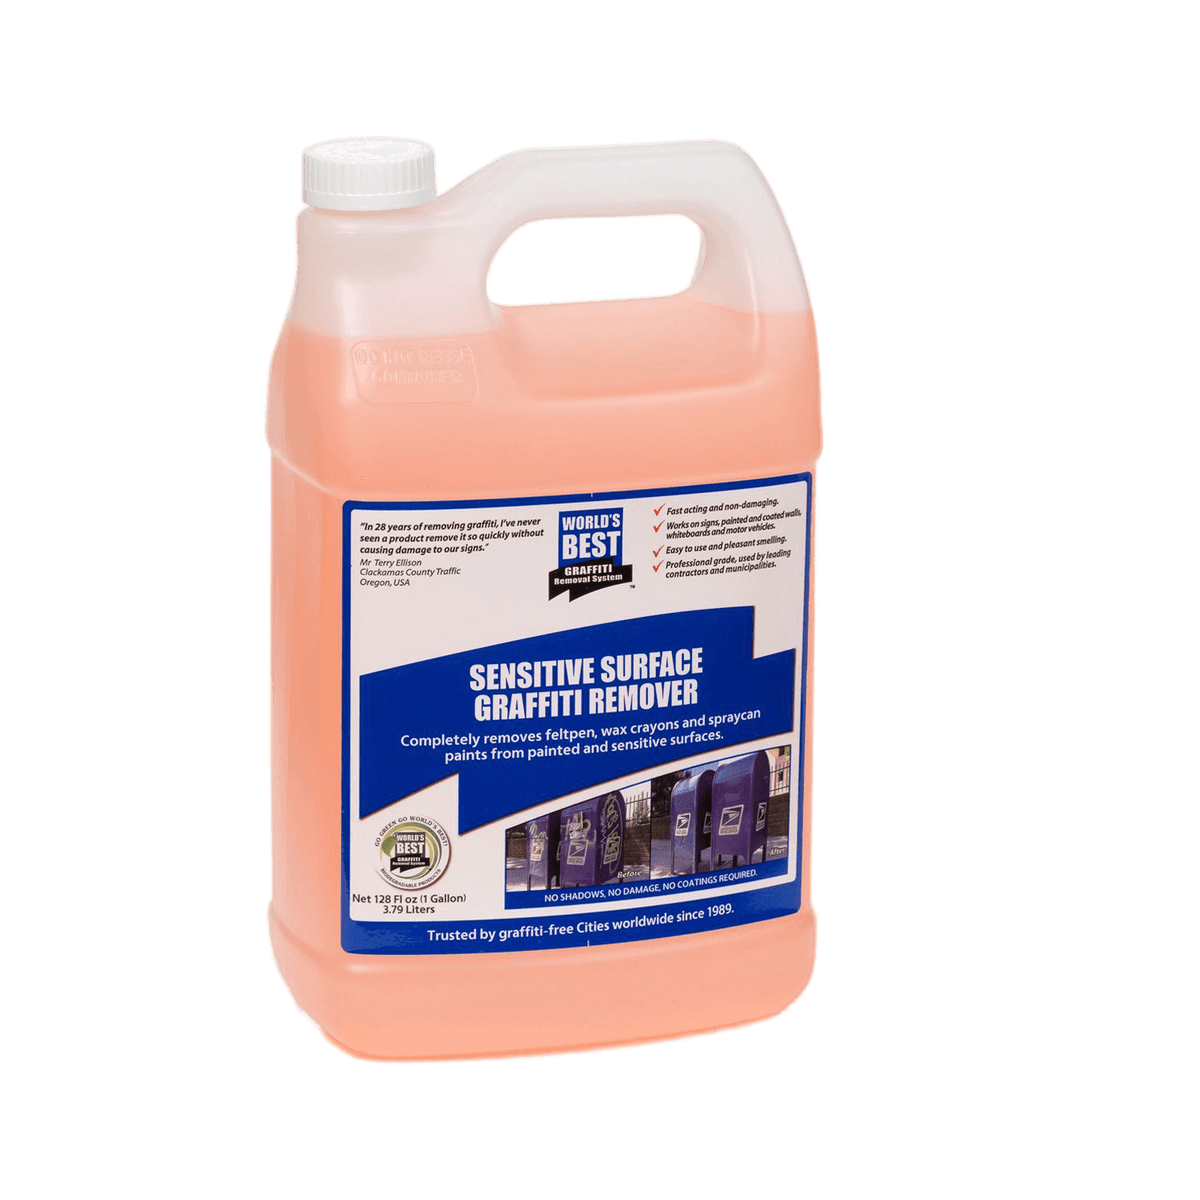 Watch Dog Smooth Surface Graffiti Remover - Gets Rid of Unwanted Aerosol  Spray Paints, Markers, Pens, Paints and Coatings from Painted and Unpainted